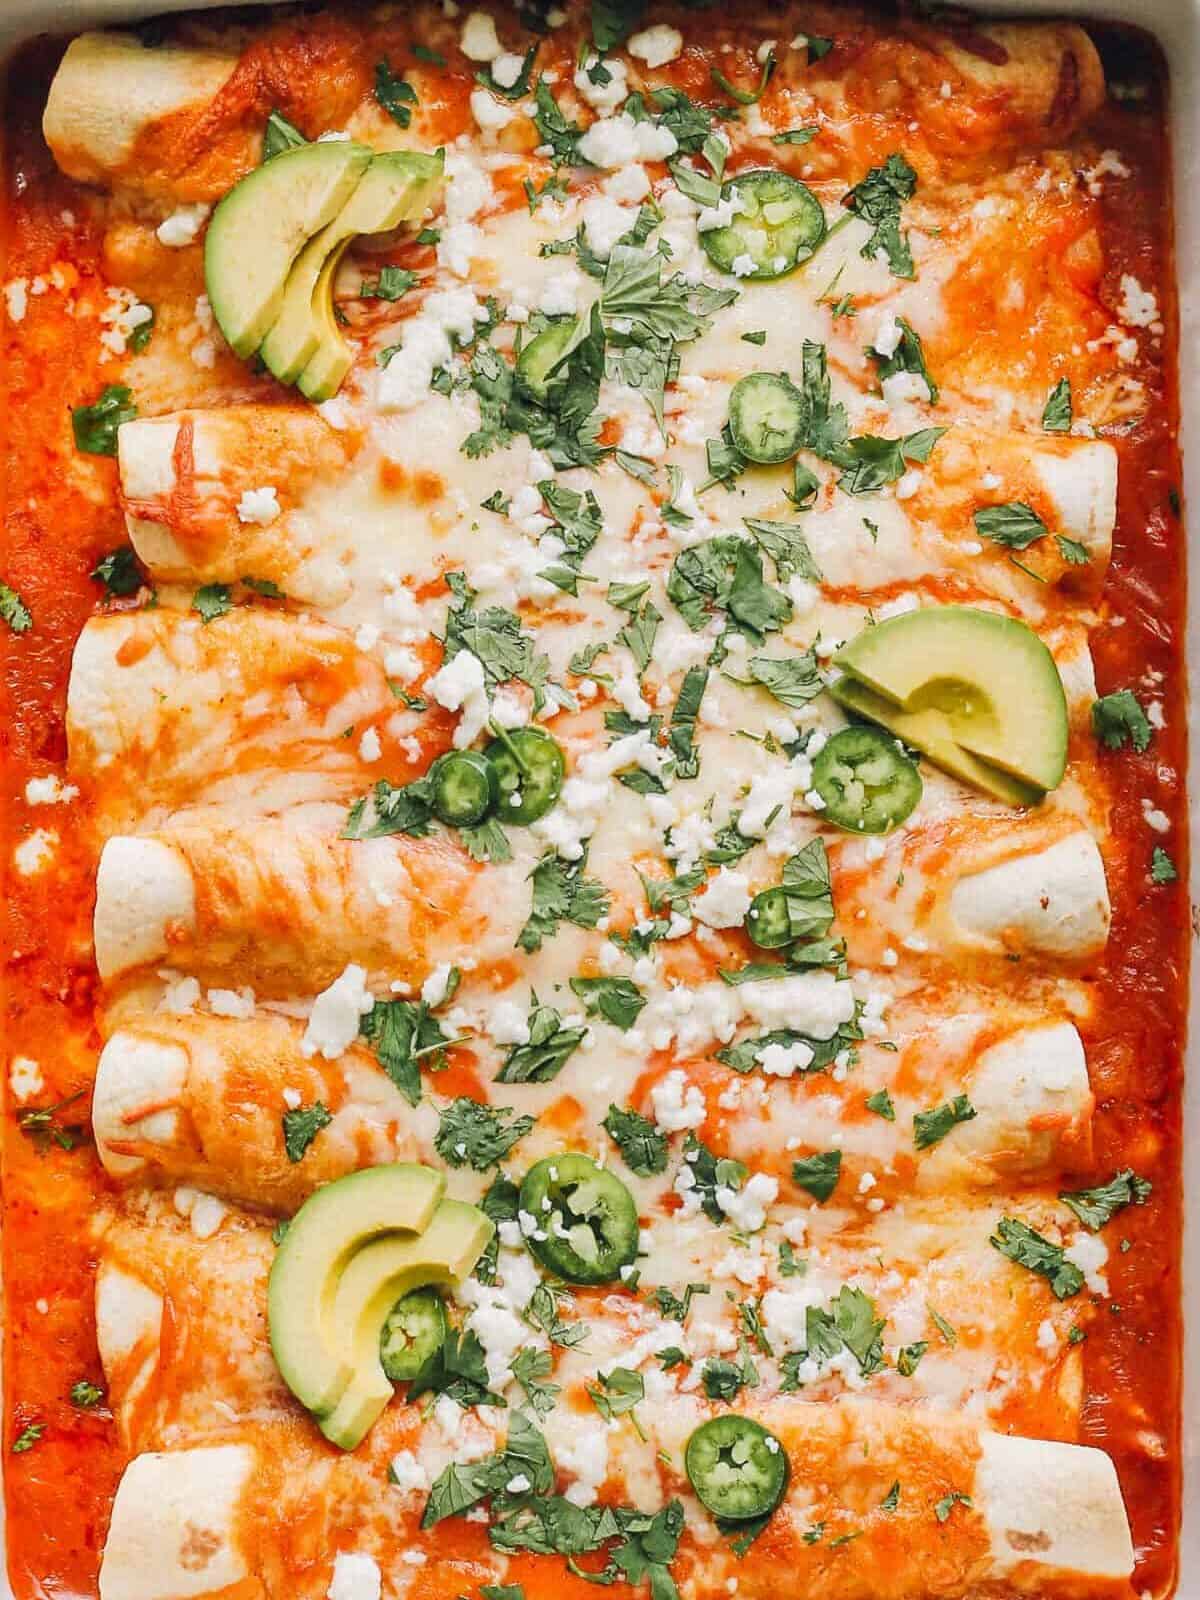 up close image of easy chicken enchiladas garnished with sour cream and cilantro